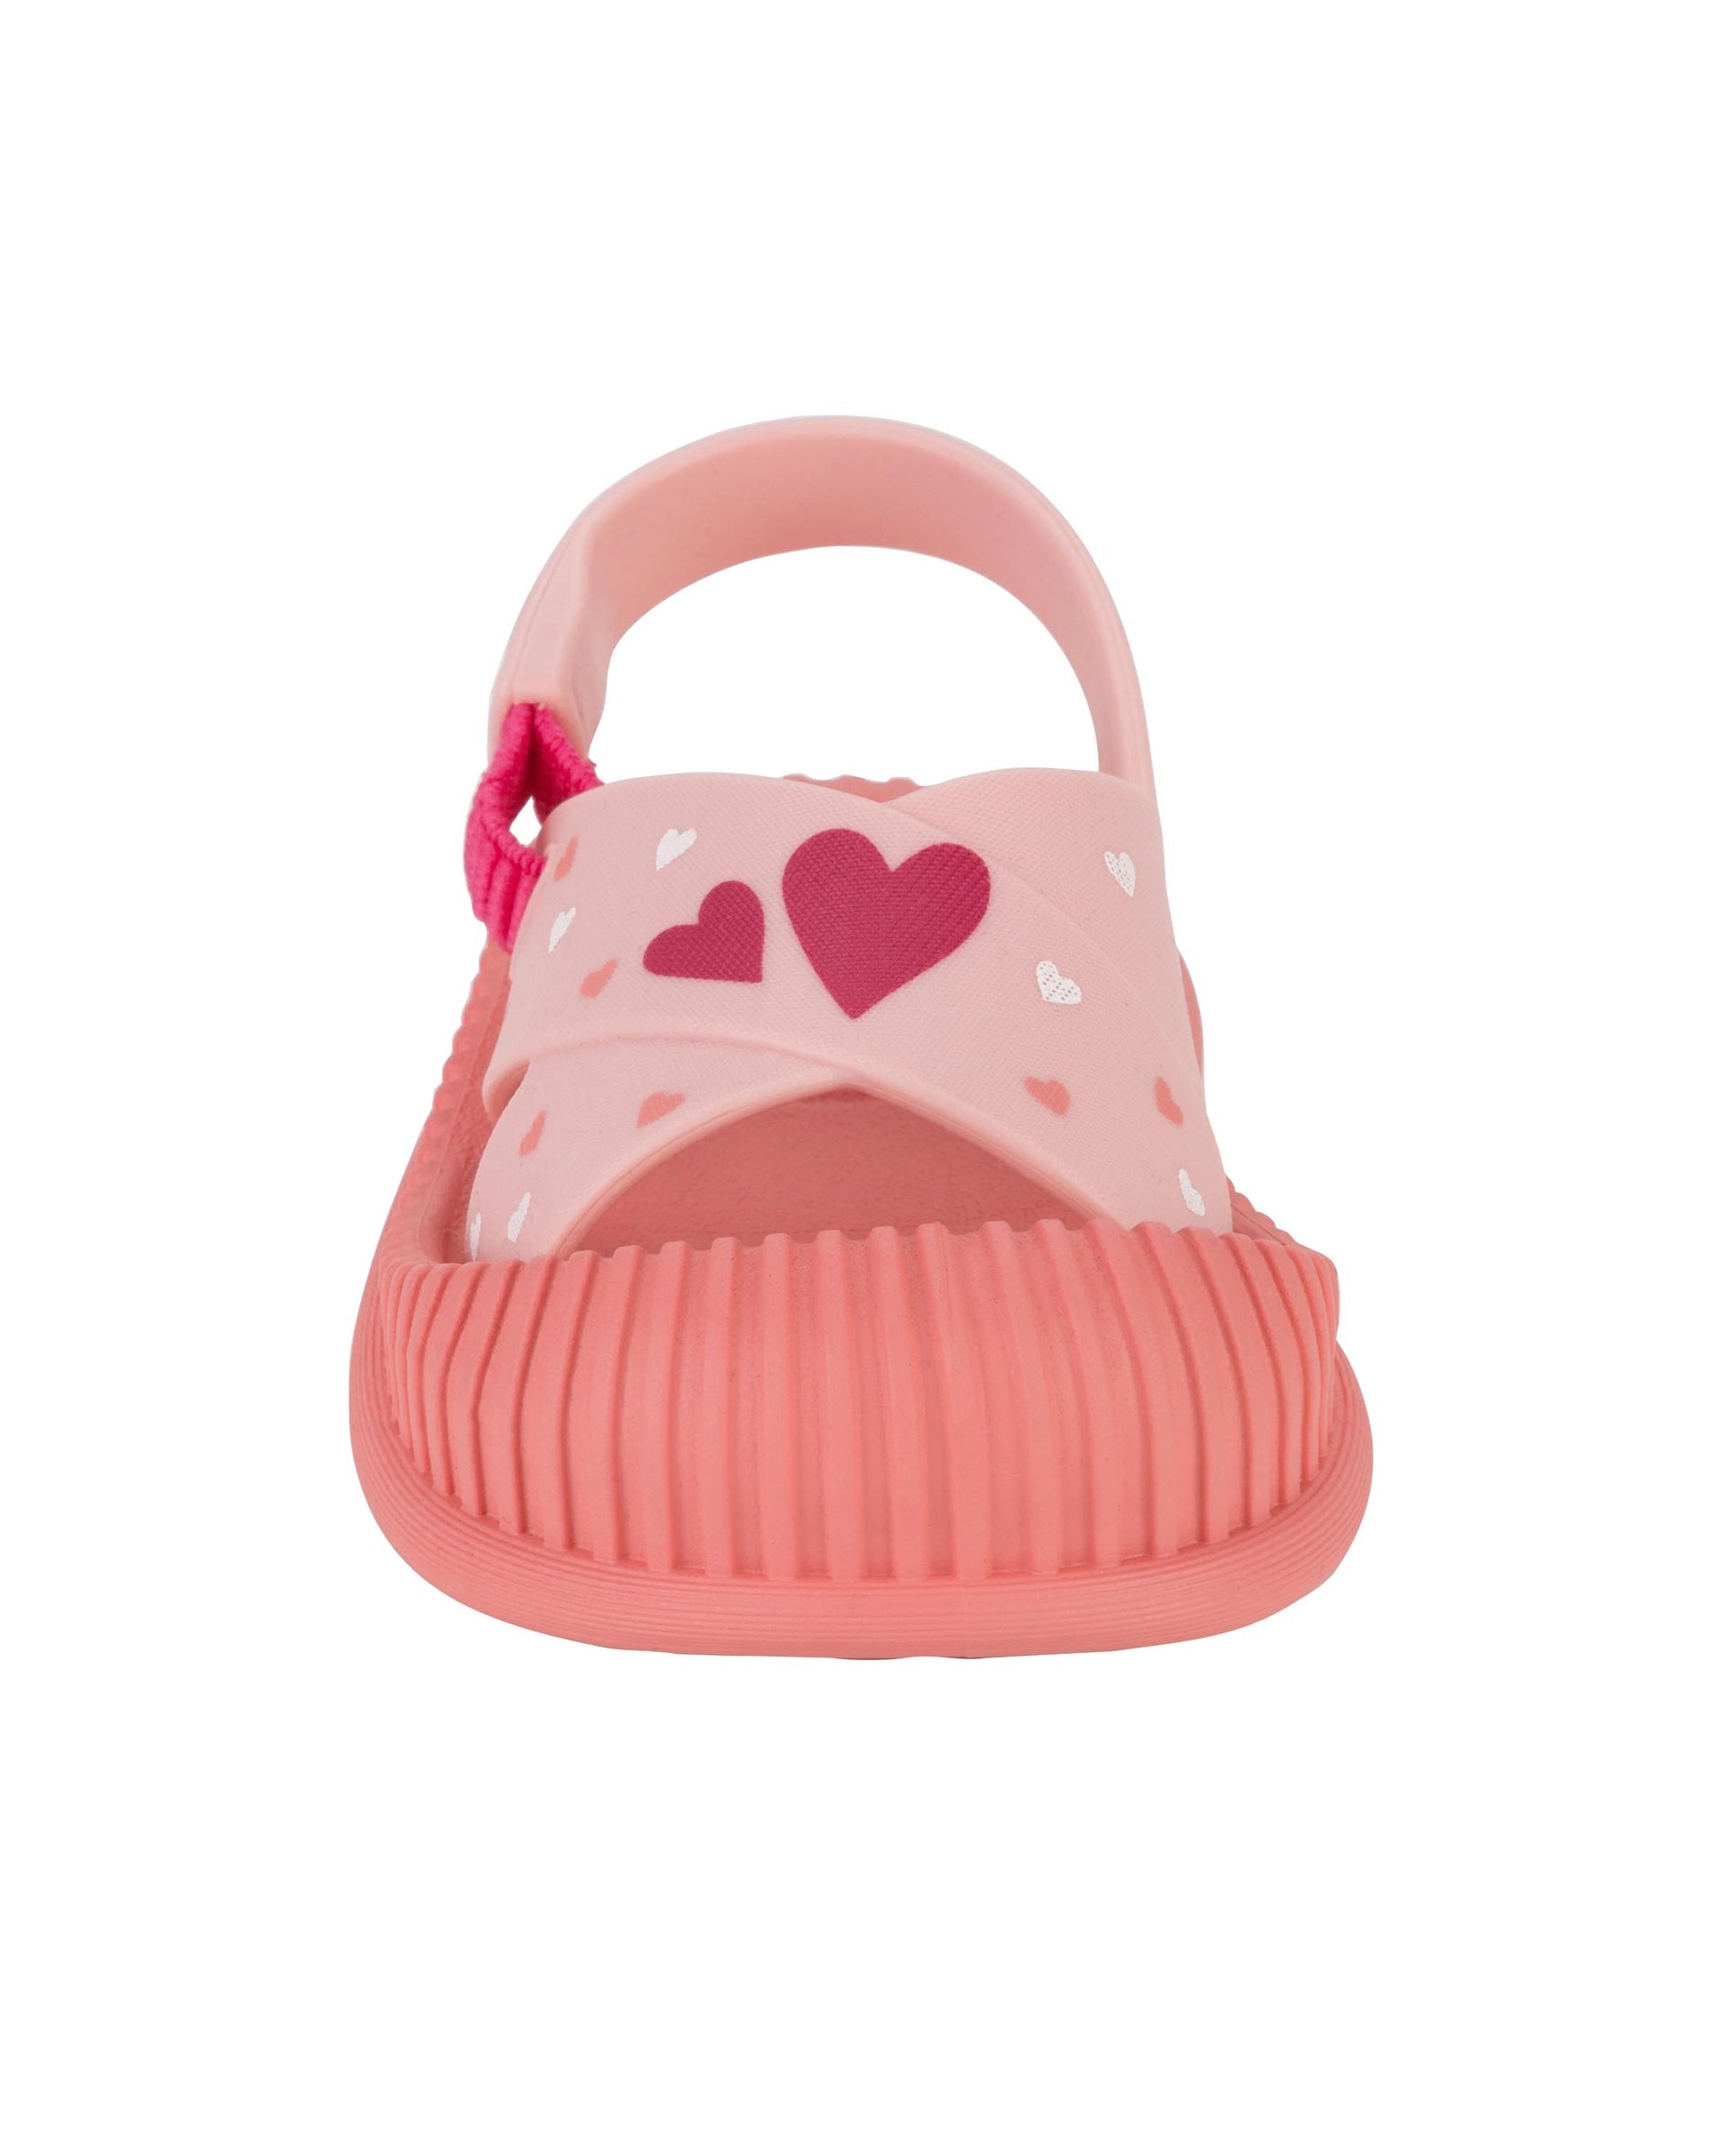 Front view of a pink Ipanema Cute baby sandal with hearts on the strap.